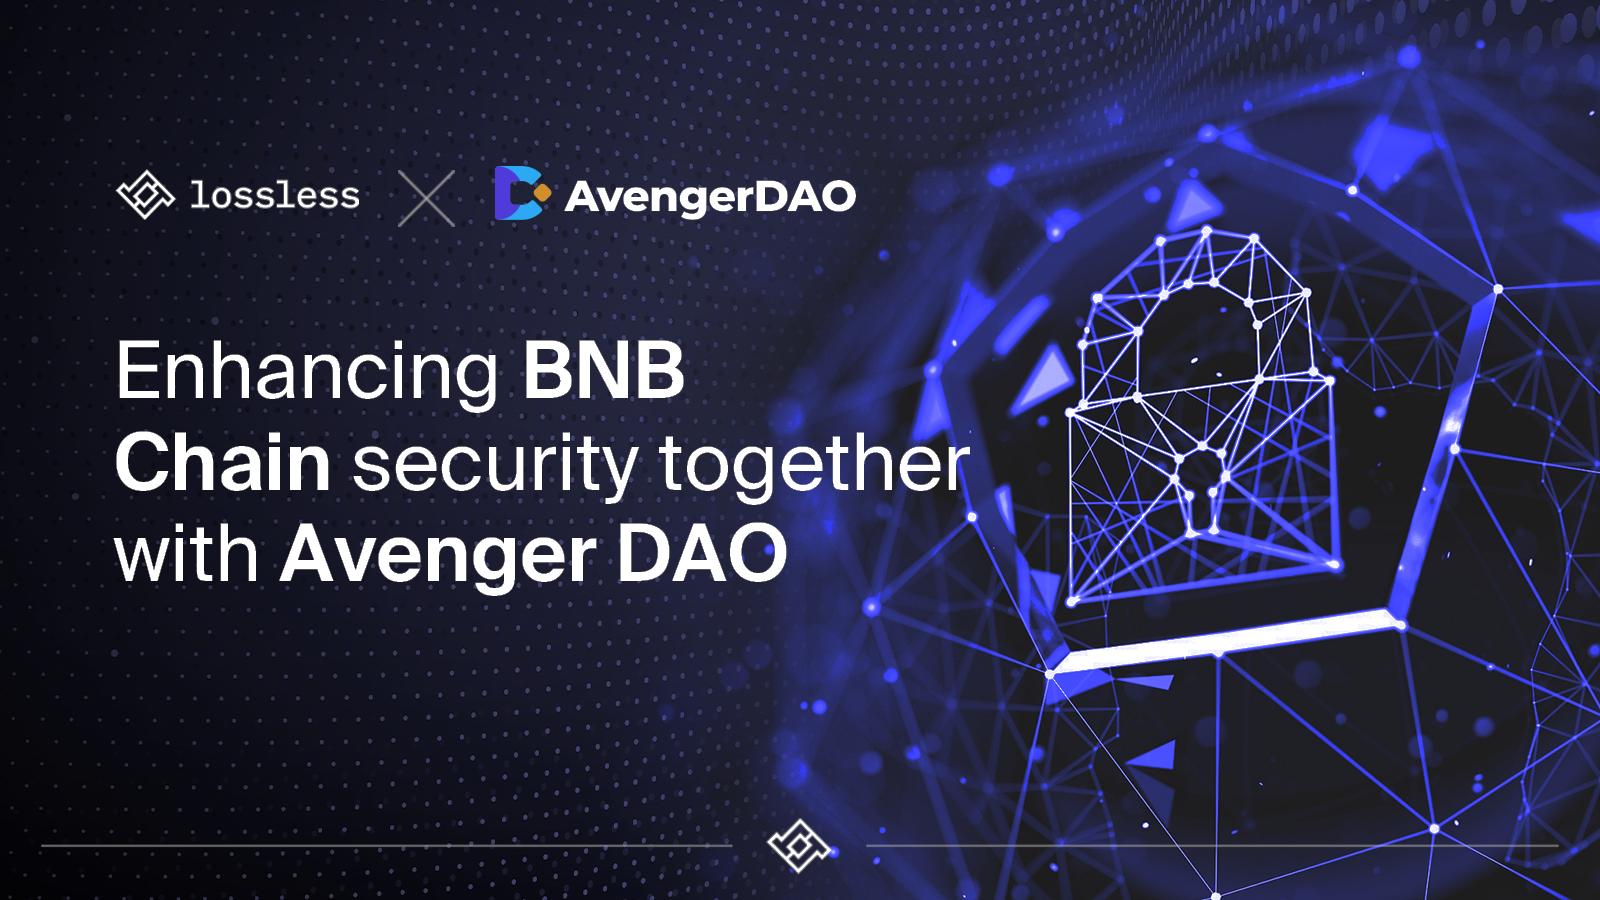 Lossless Aegis takes a leap into BNB Chain with Avenger DAO